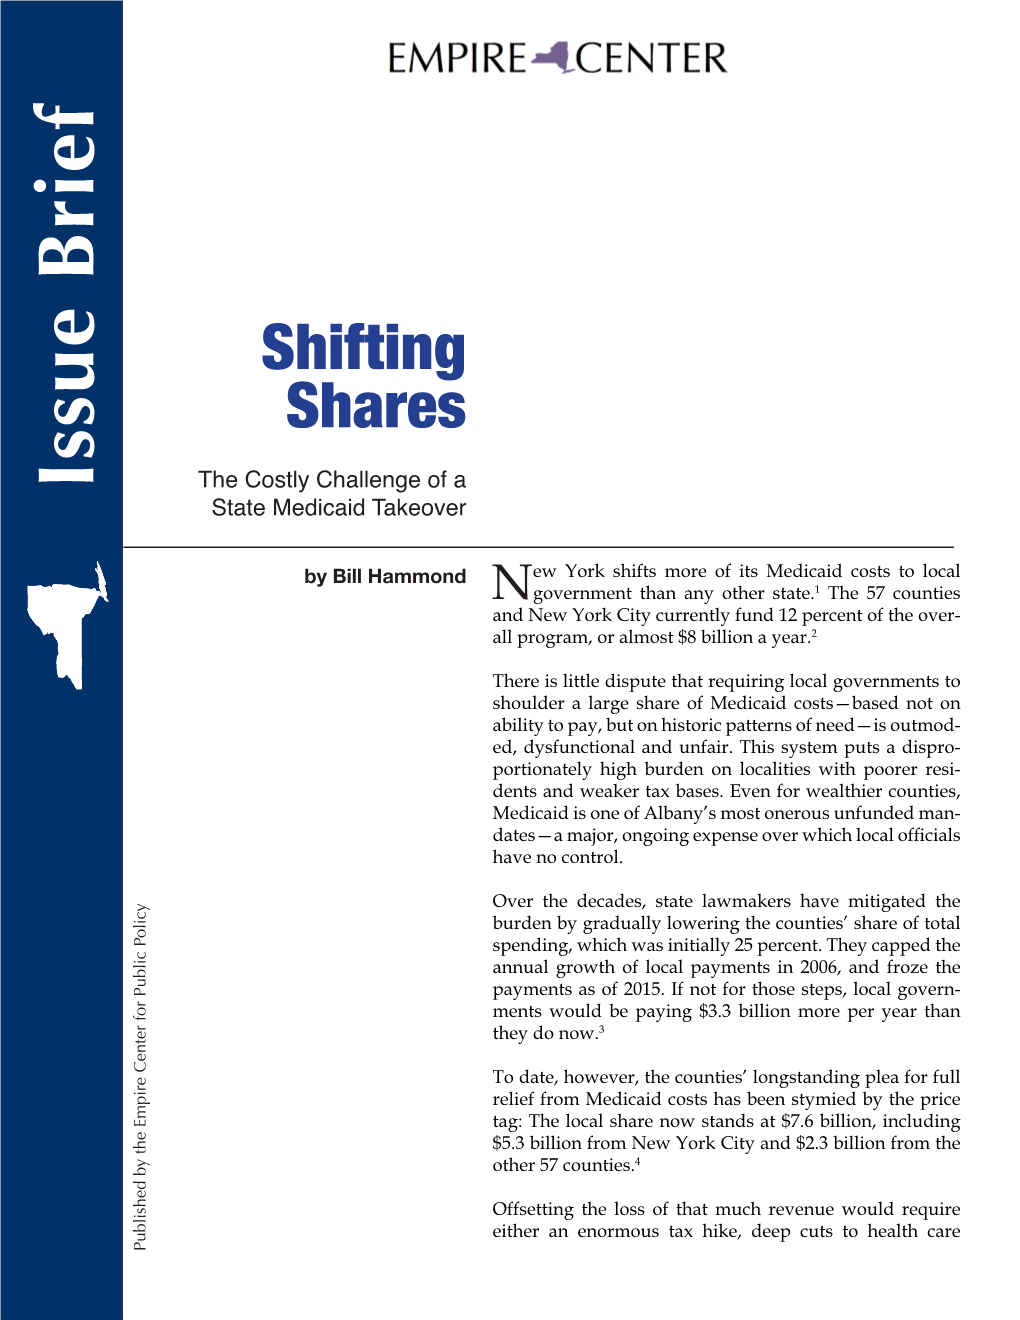 Issue Brief Published by the Empire Center for Public Policy the Costlychallengeofa State Medicaid Takeovermedicaid State Shifting Shares by Billhammond